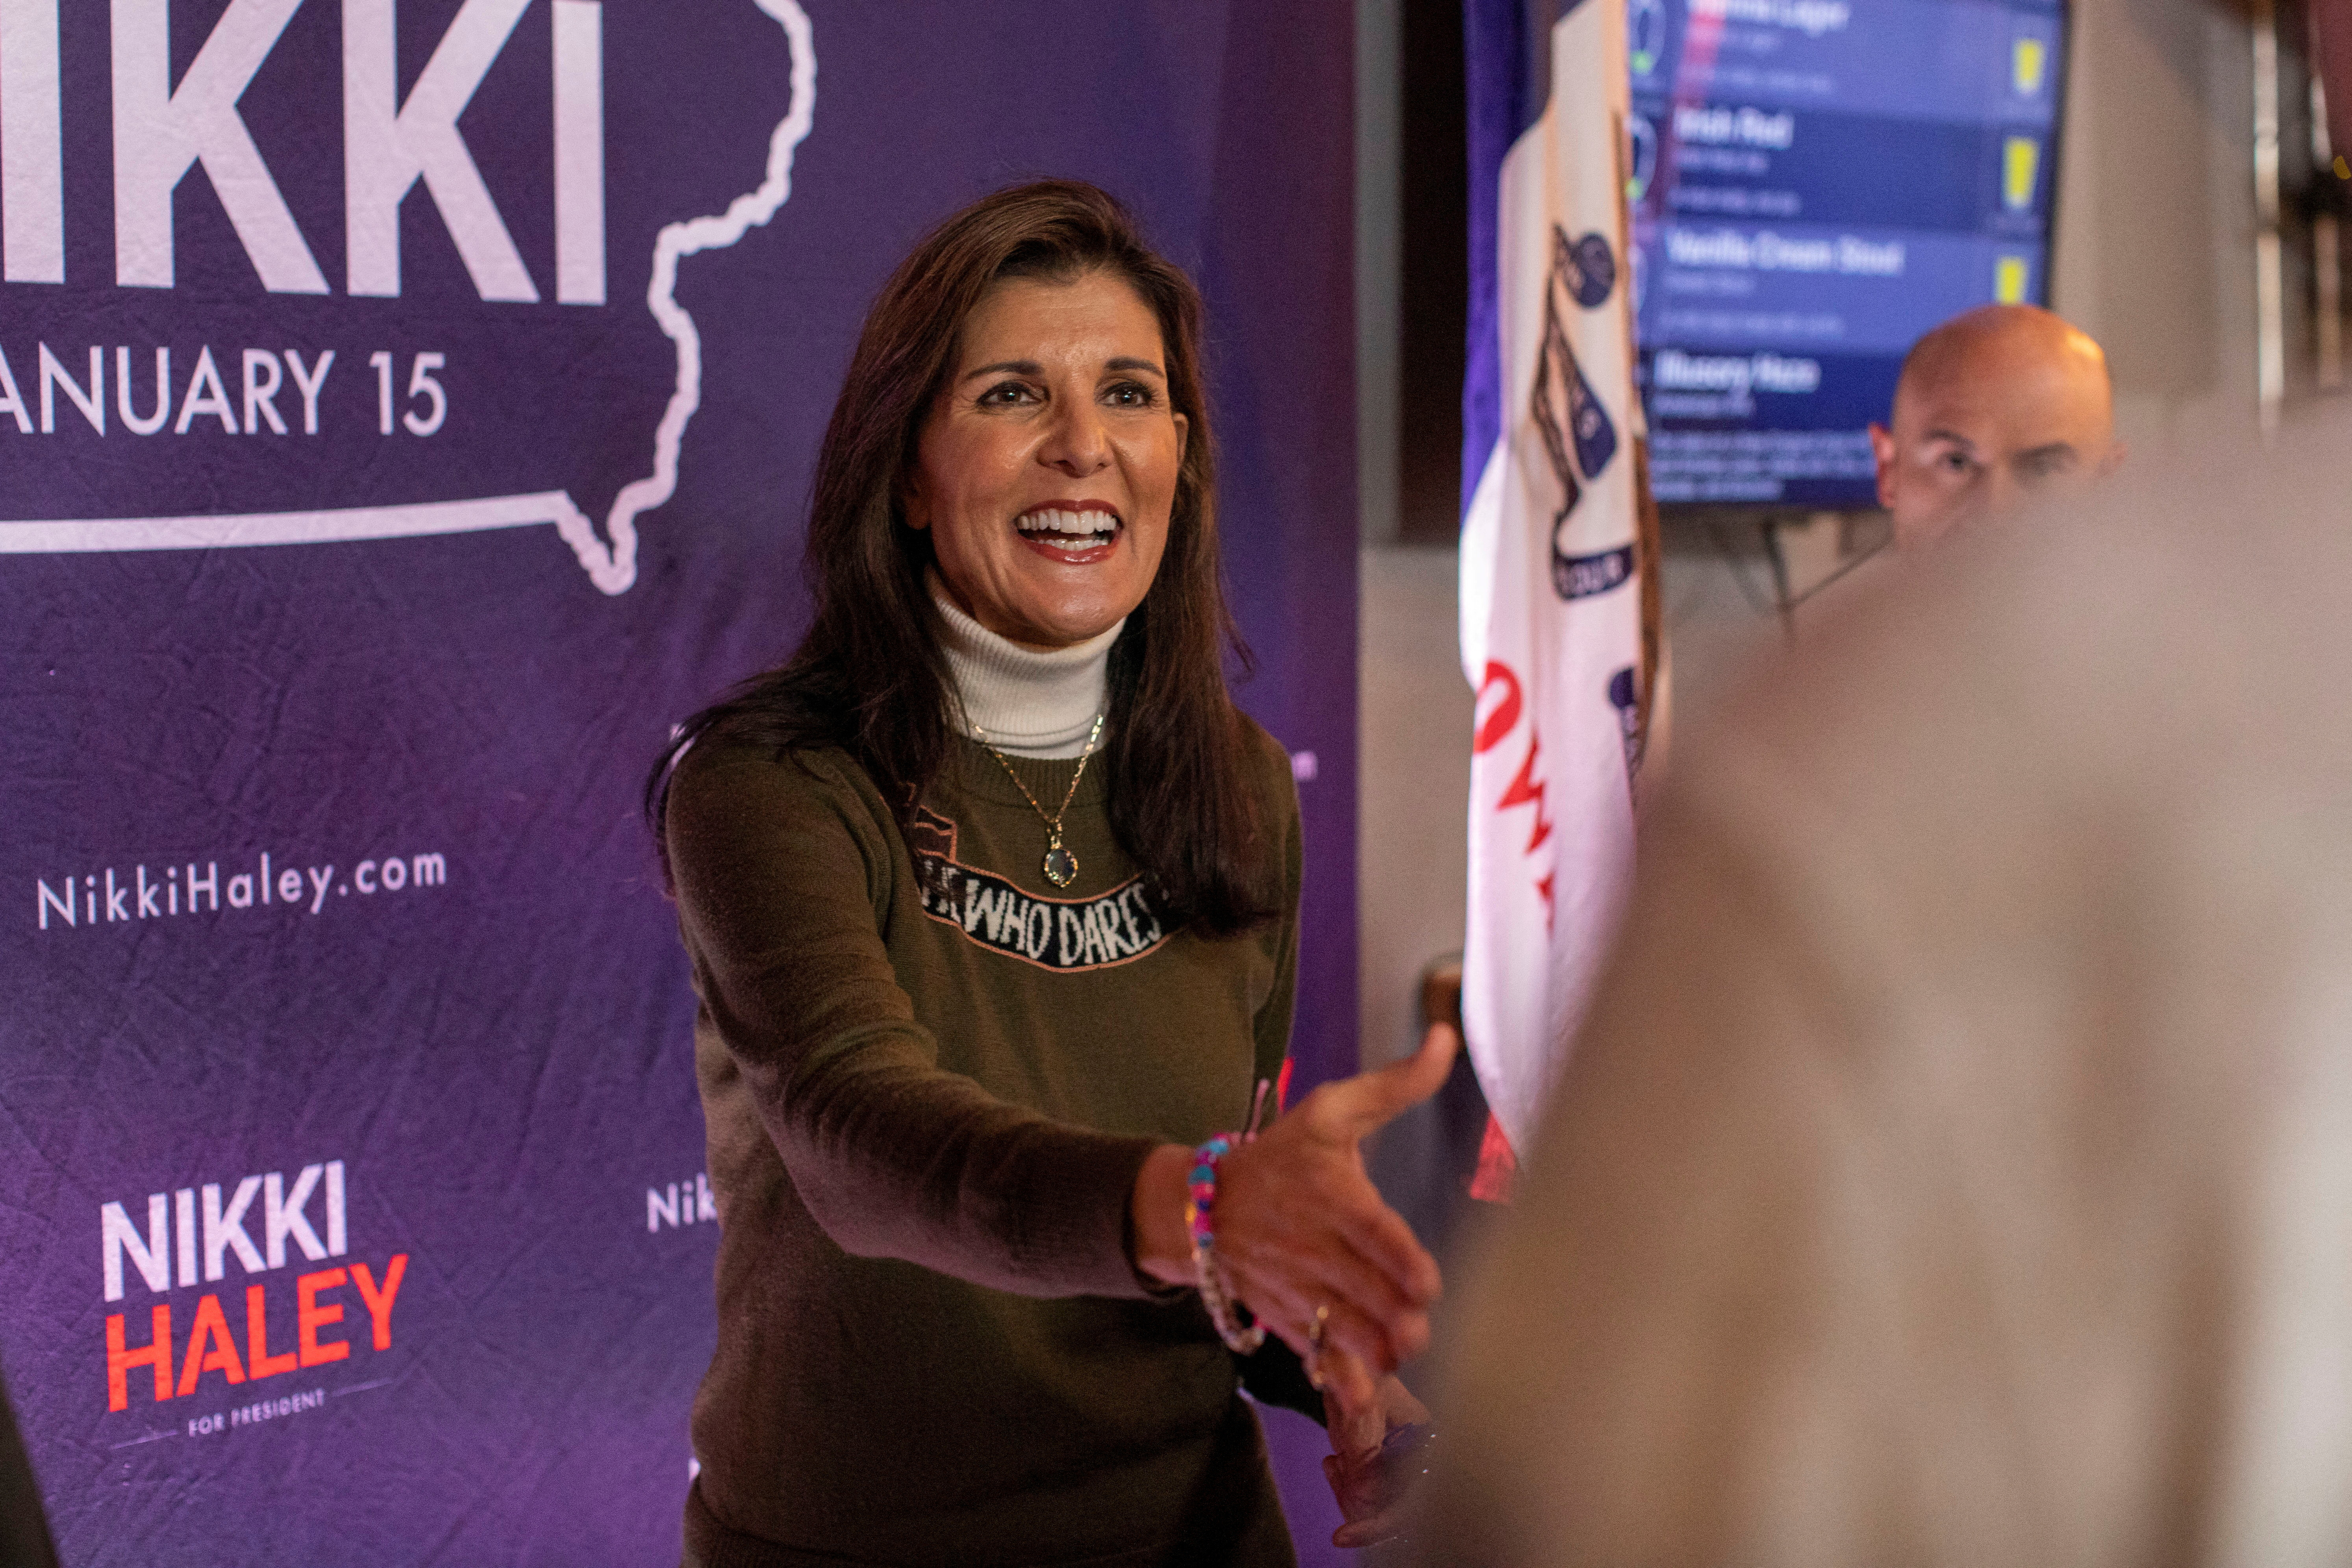 Republican presidential candidate and former U.S. Ambassador to the United Nations Nikki Haley campaigns in Iowa